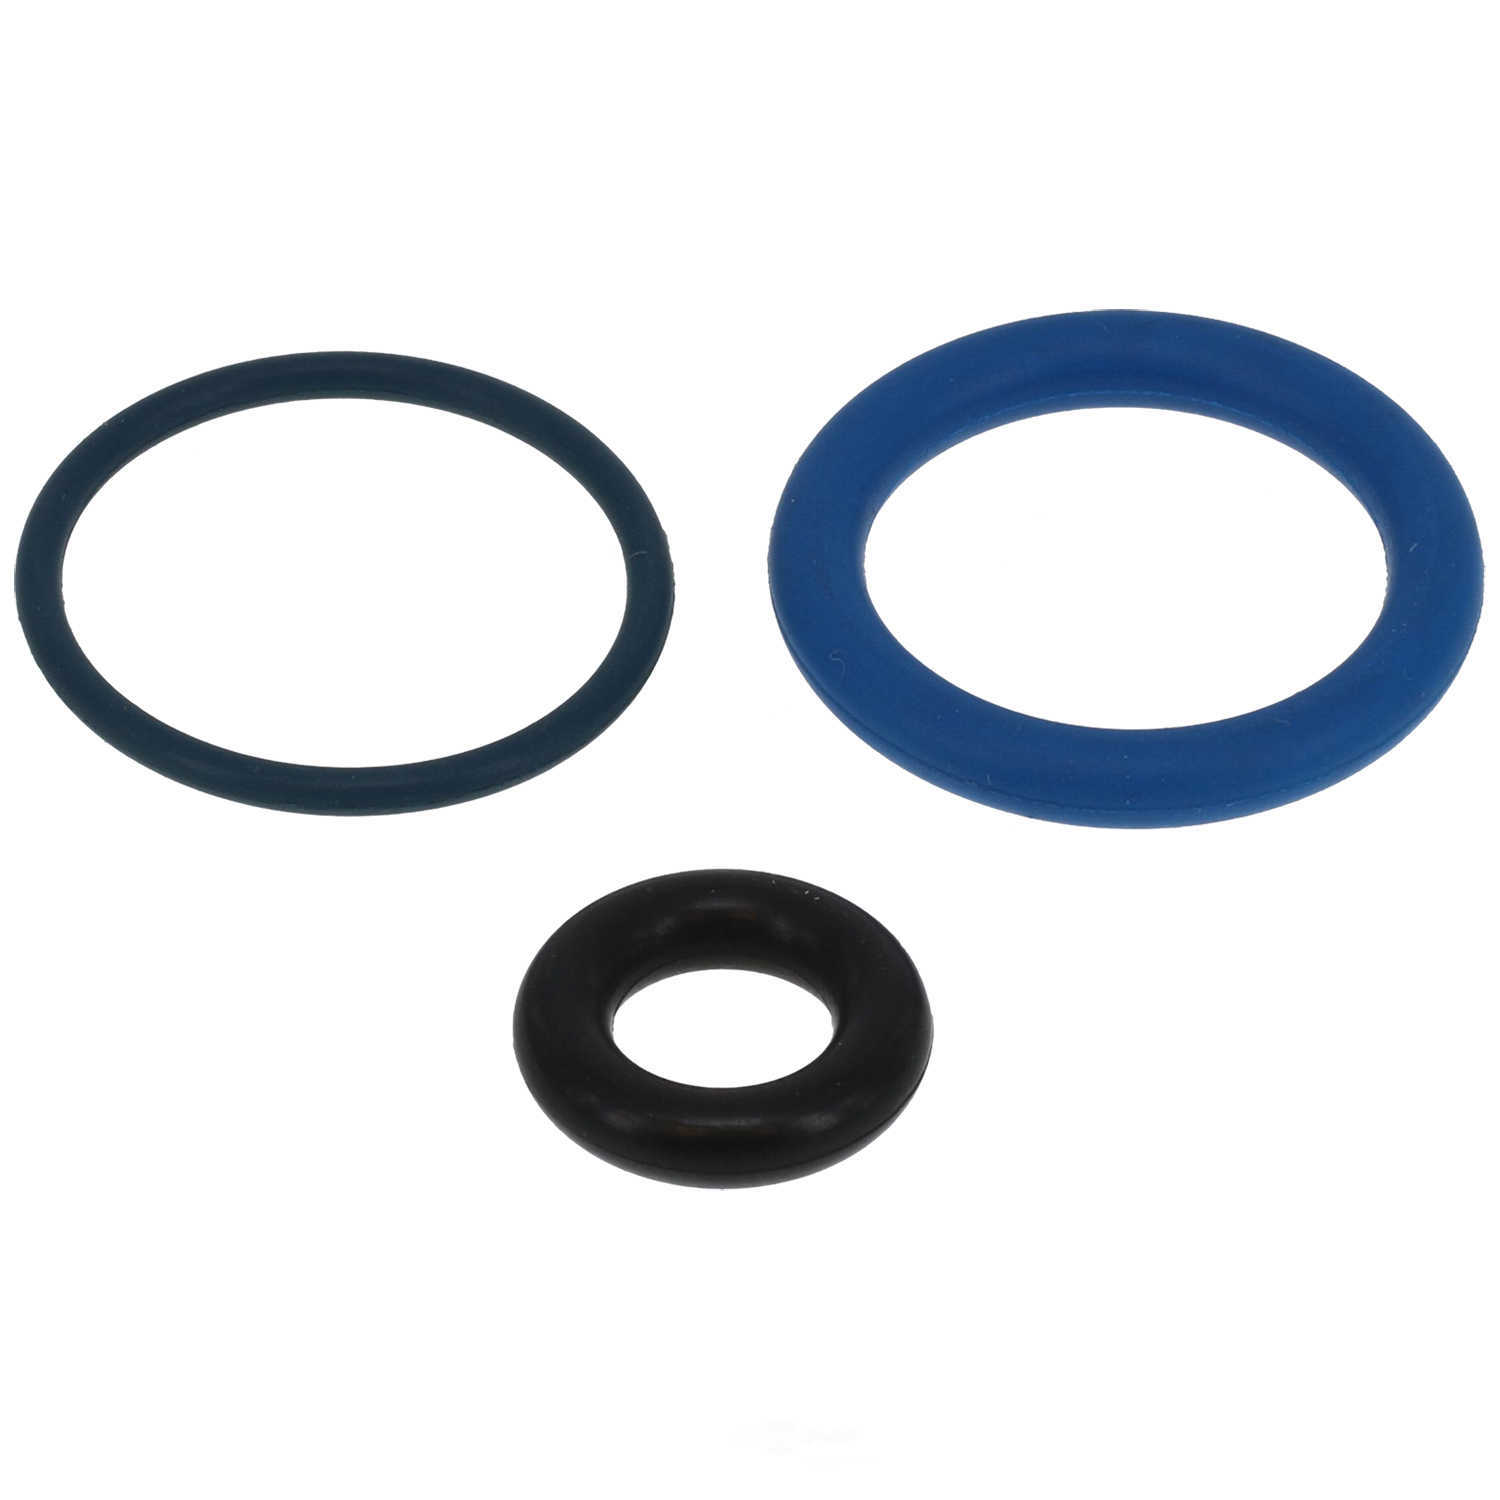 GB REMANUFACTURING INC. - Fuel Injector Seal Kit - GBR 8-028